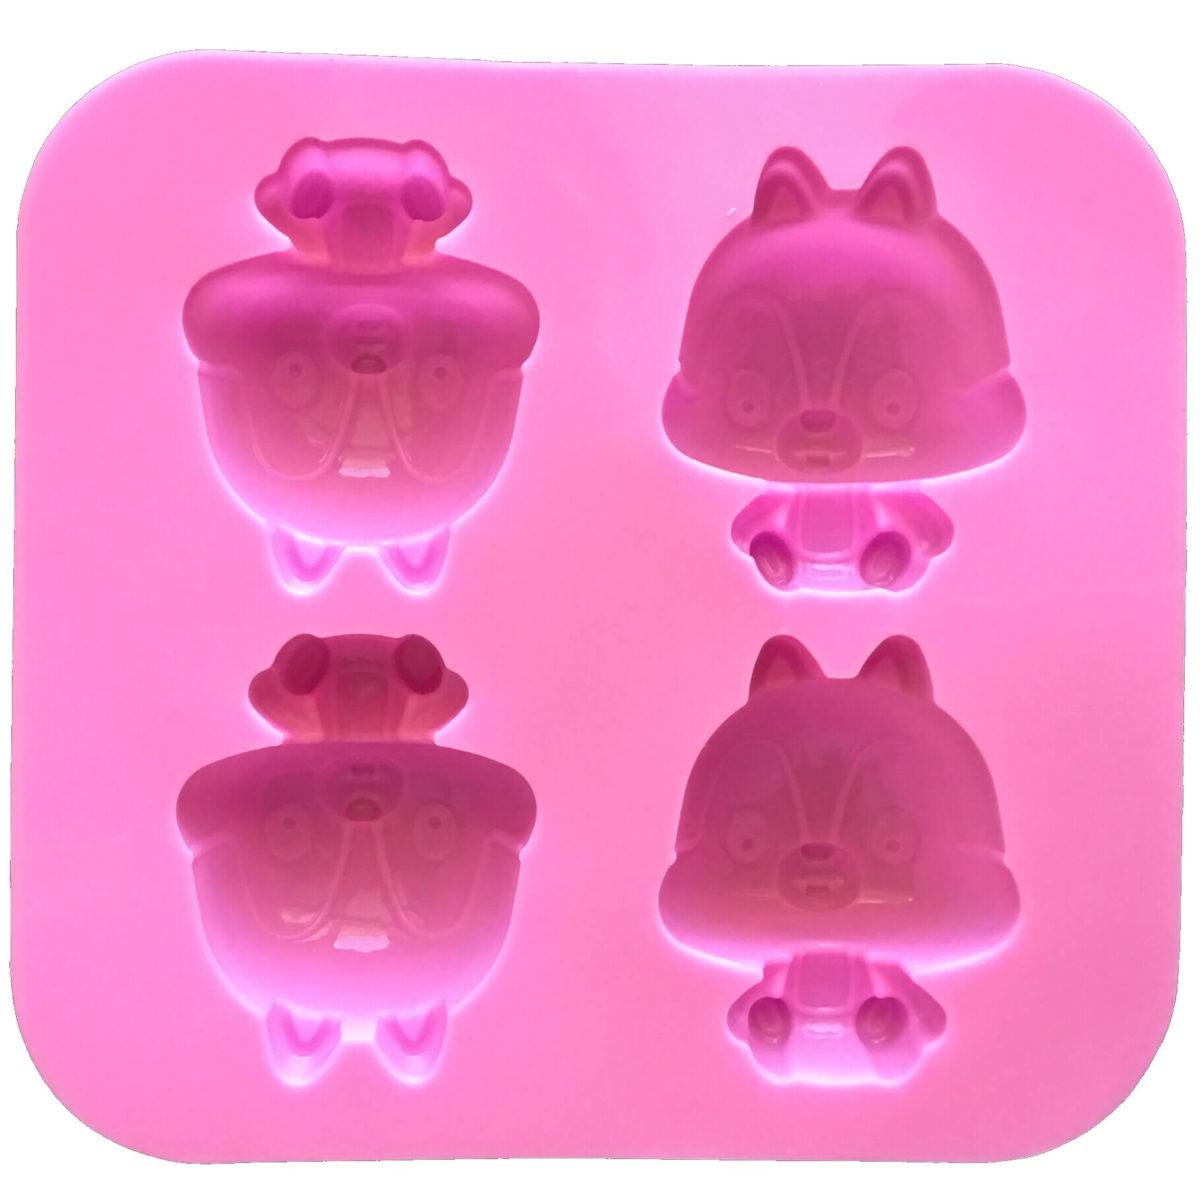 pink silicone mould with four identical cavities displaying a cartoon chipmunk showing cavity details